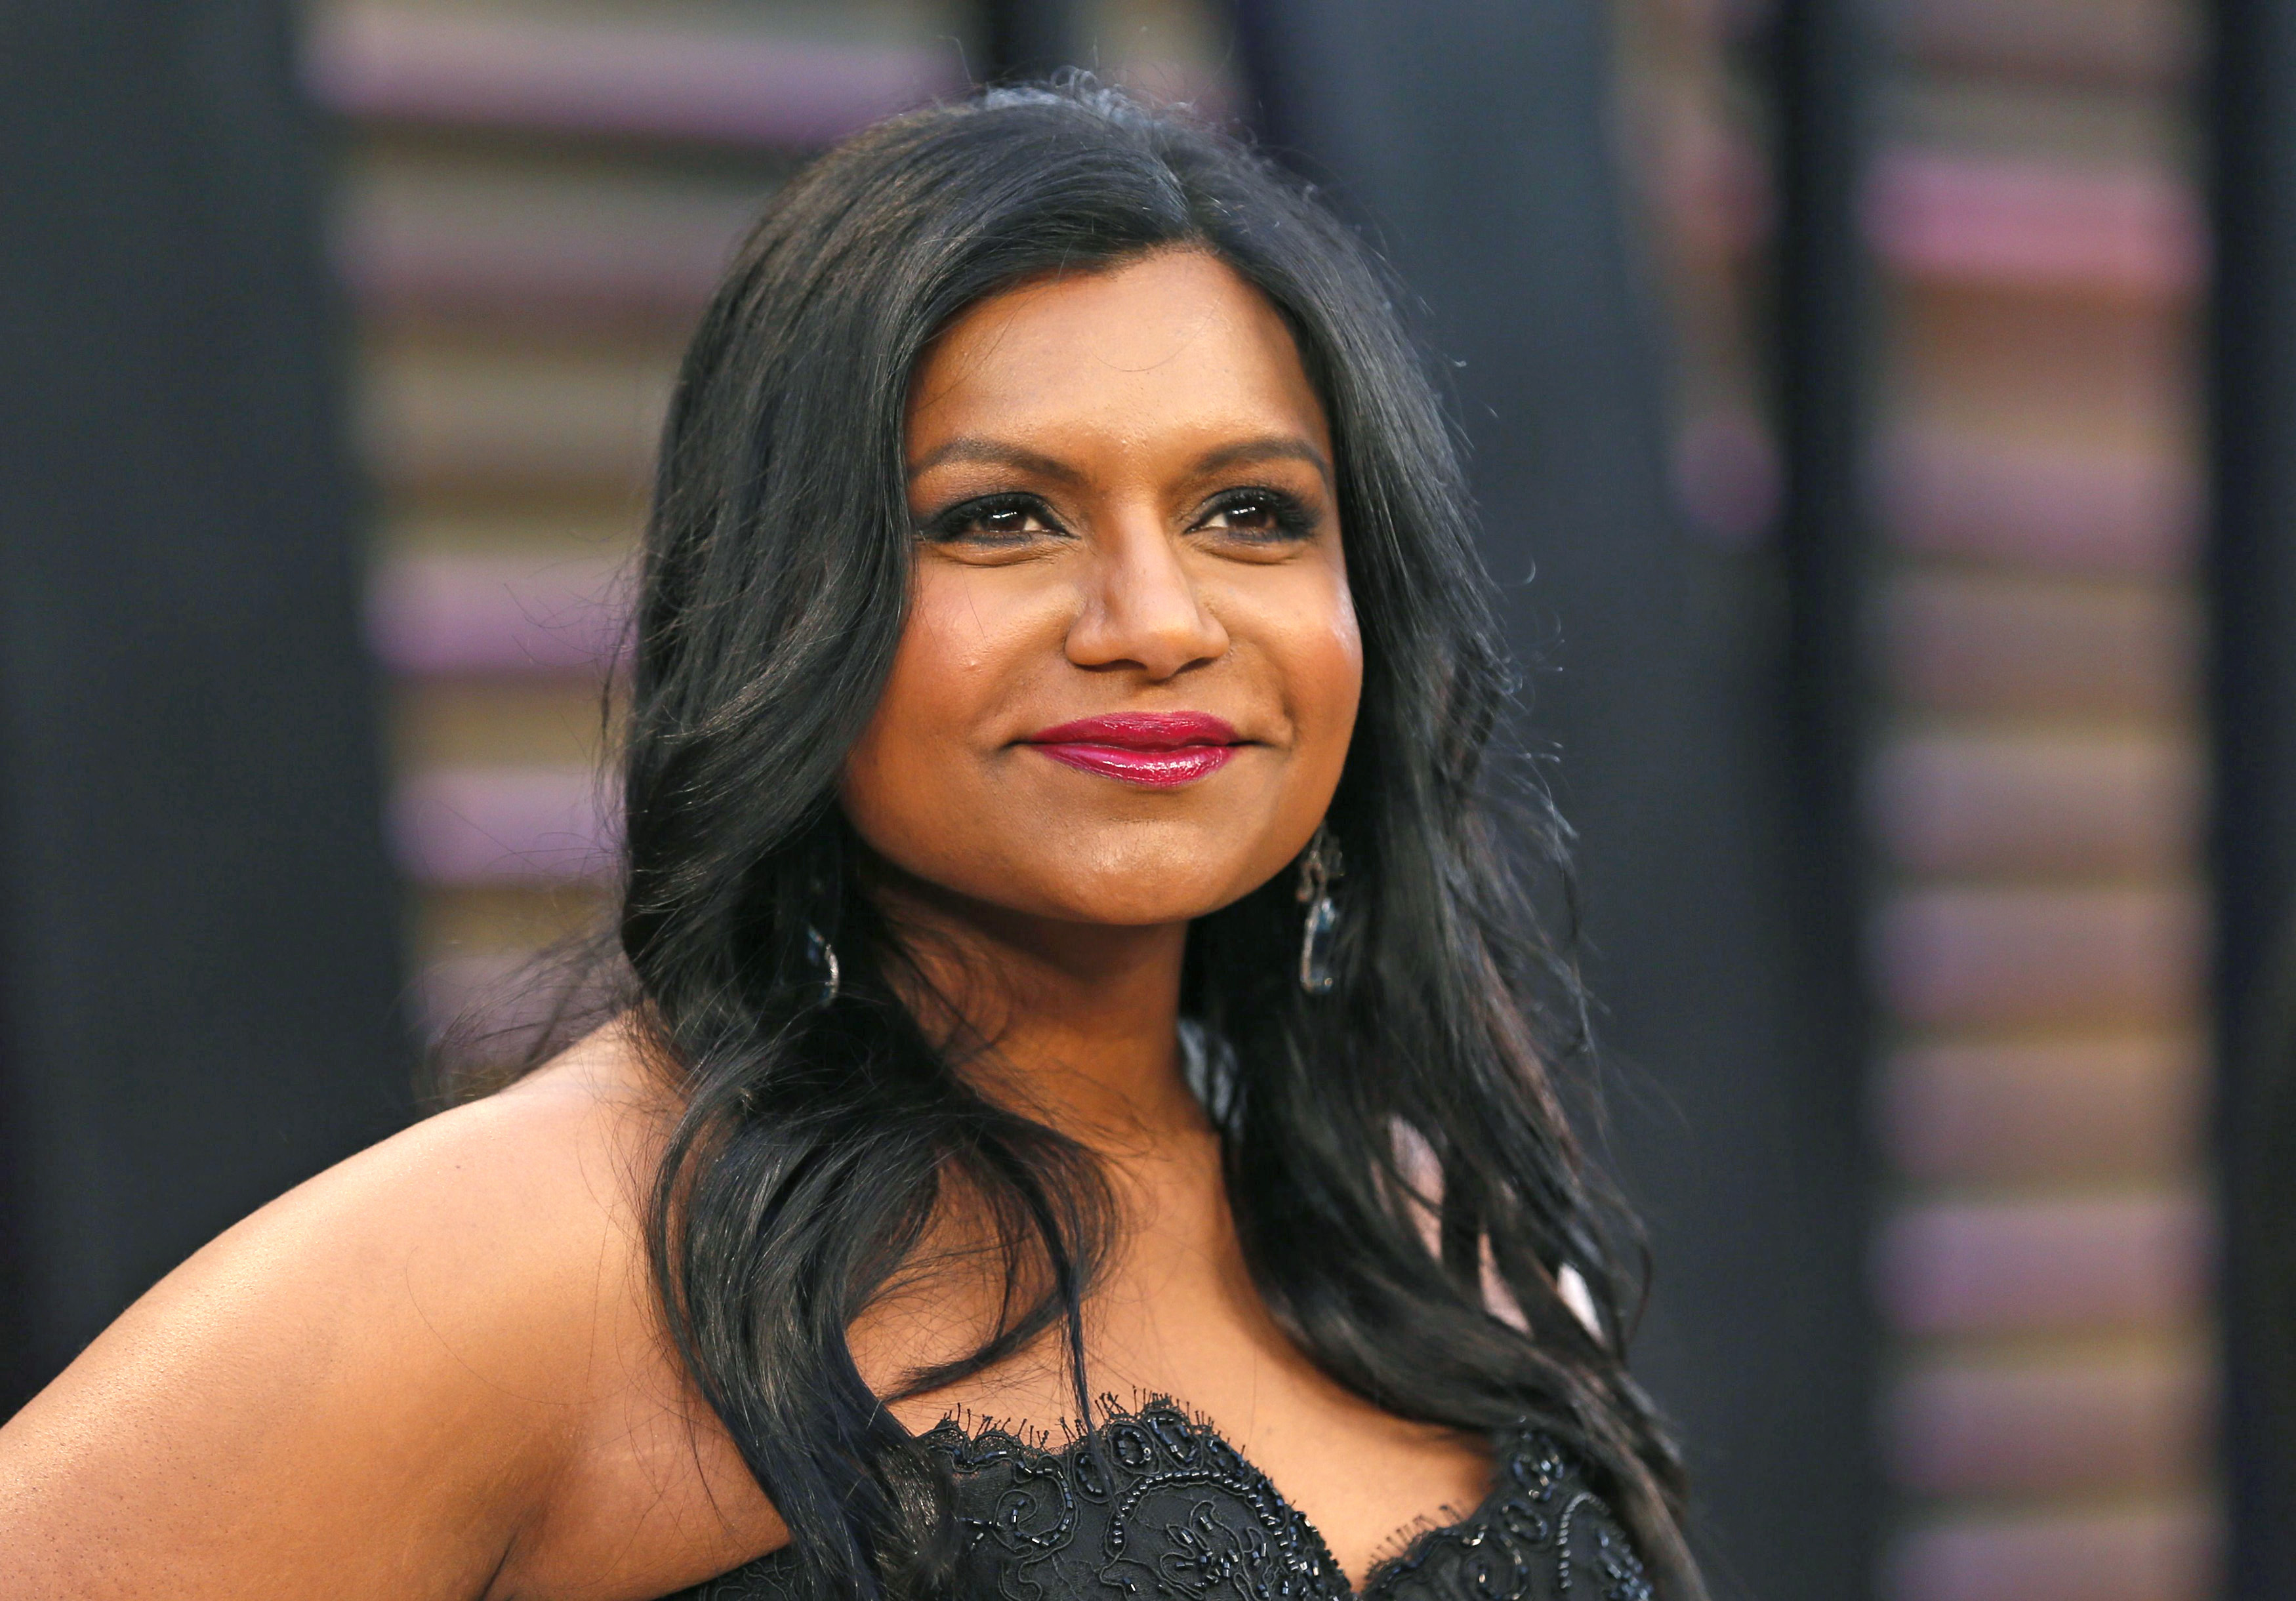 Actress Mindy Kaling arrives at the 2014 Vanity Fair Oscars Party in West Hollywood